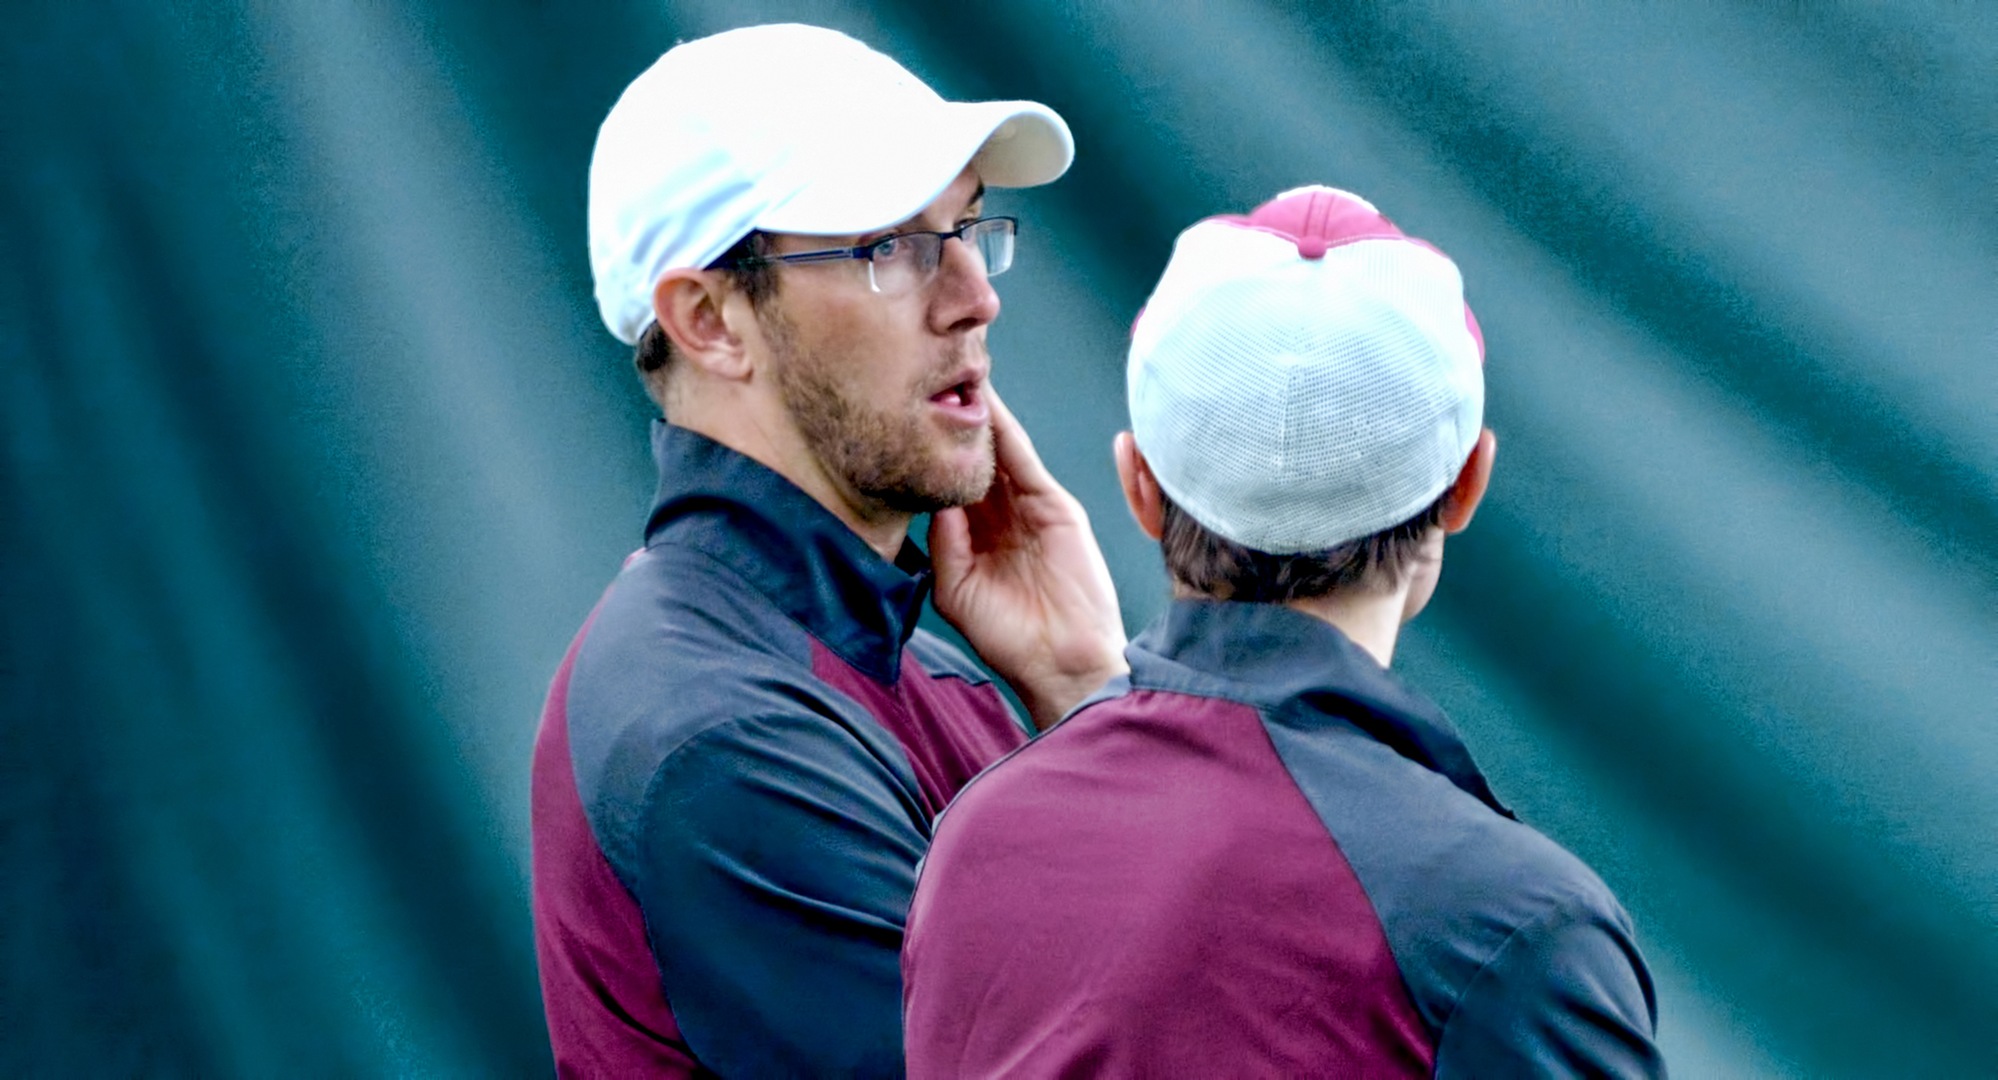 Joseph Murrey was named the MIAC Coach of the Year in his second season at the helm of the Cobbers.